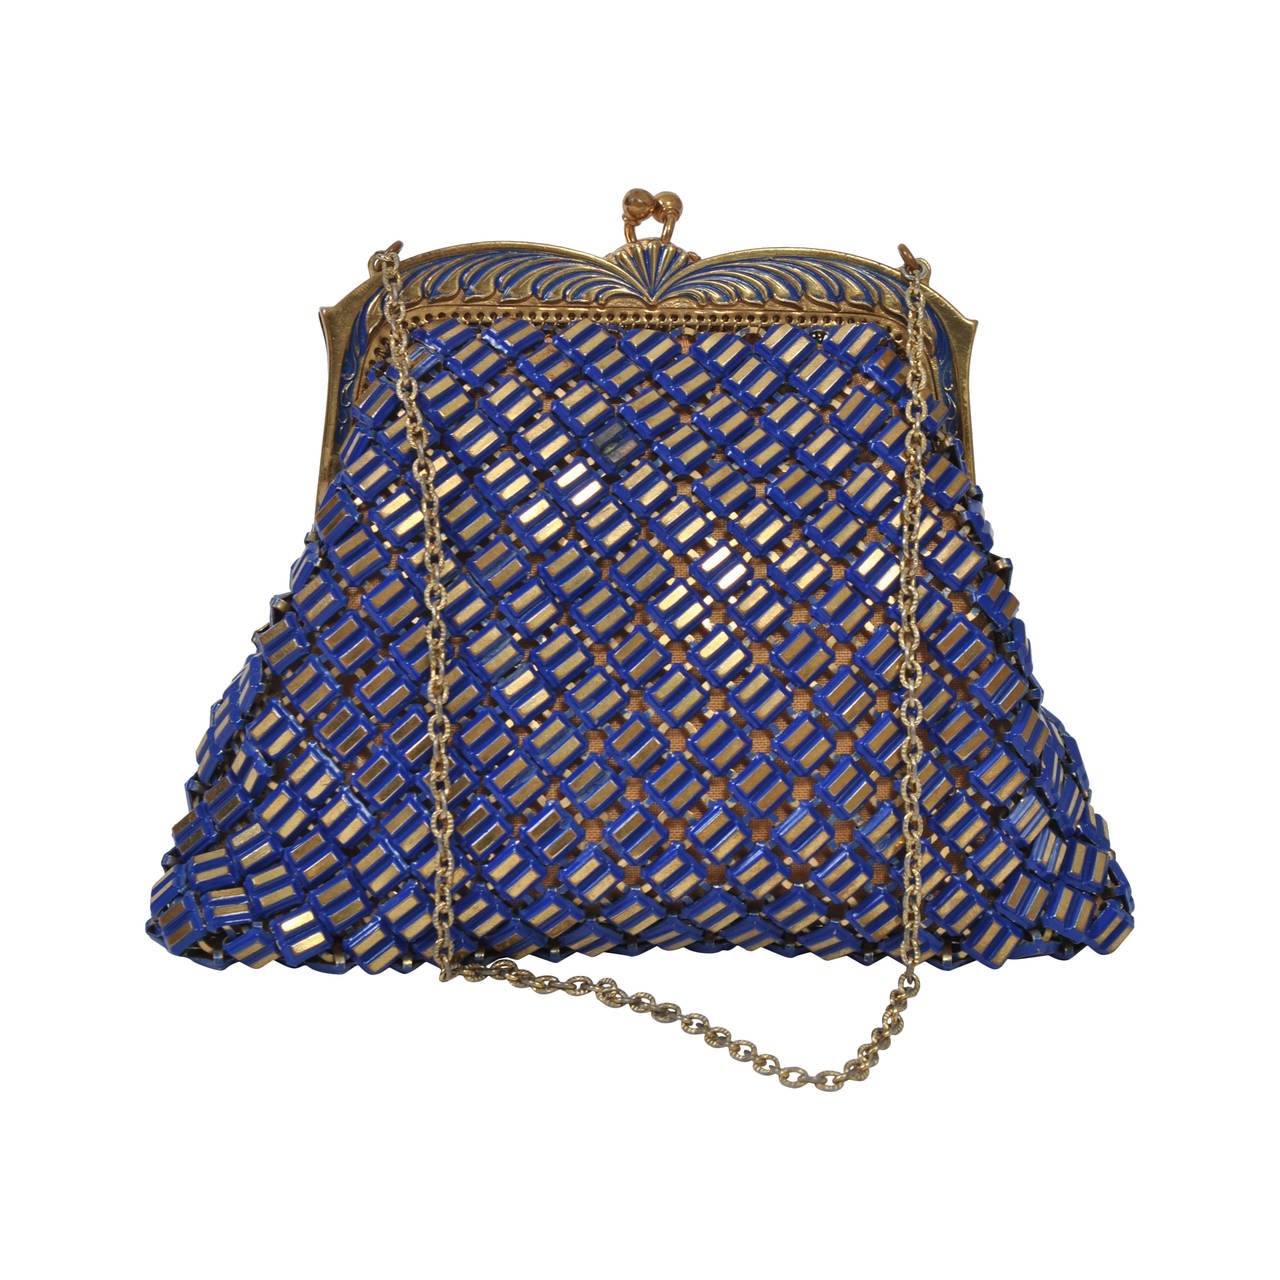 Whiting & Davis Blue and Gold Mesh Bag